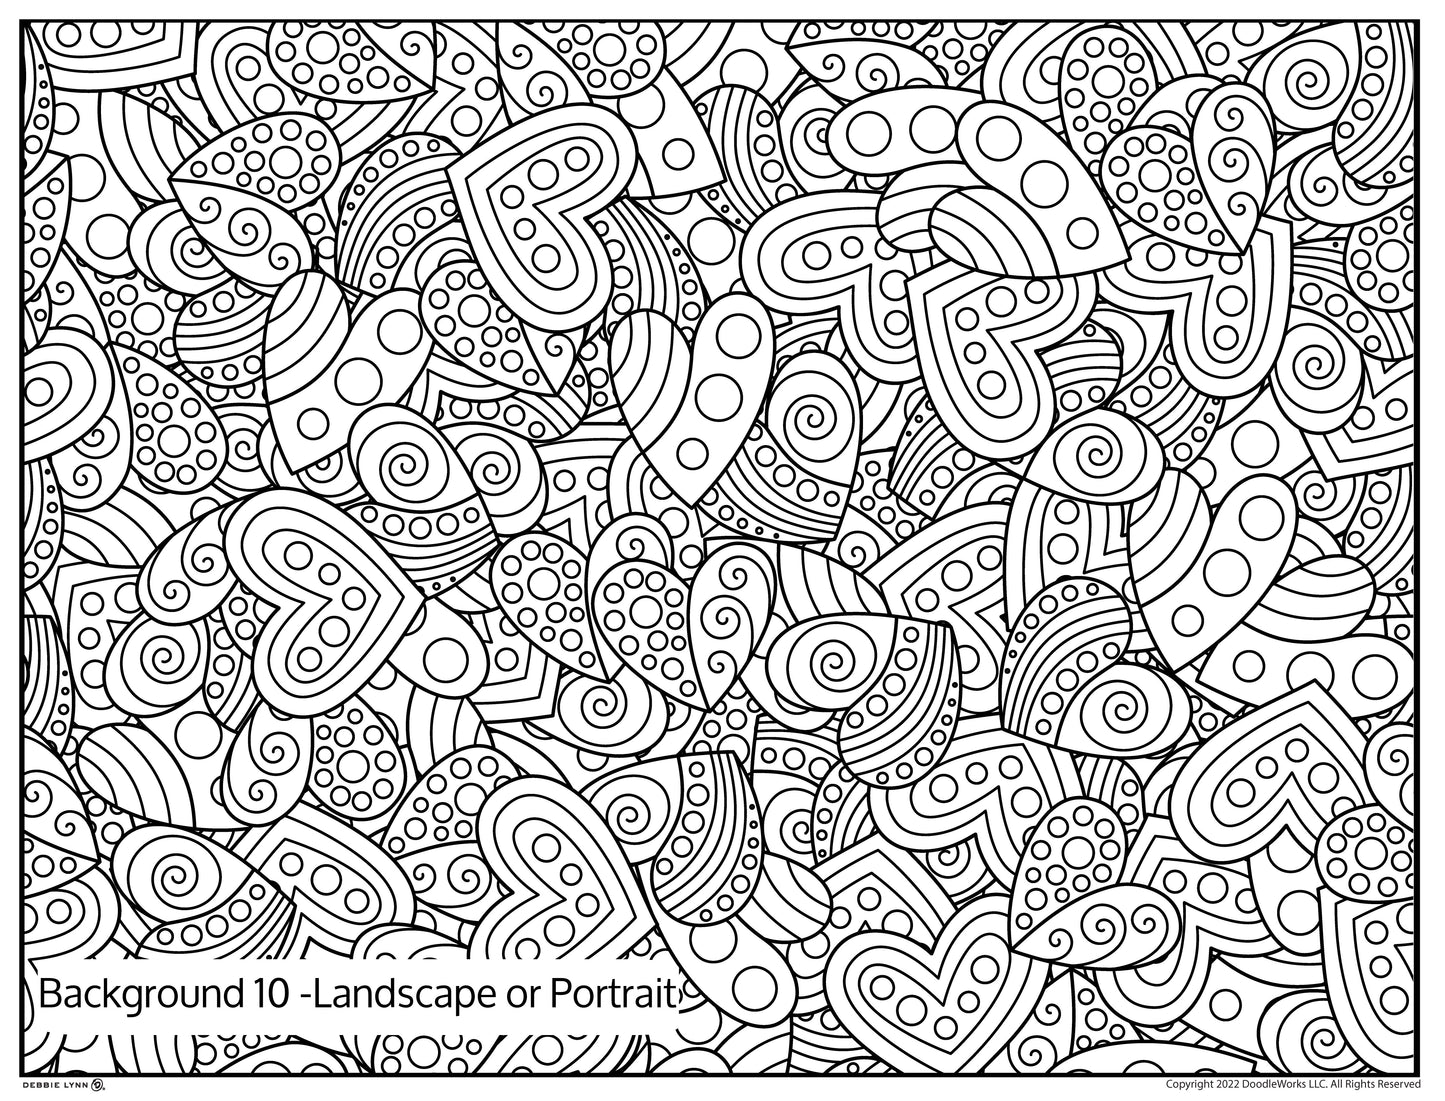 Background 10 Custom Personalized Giant Coloring Poster 46"x60"